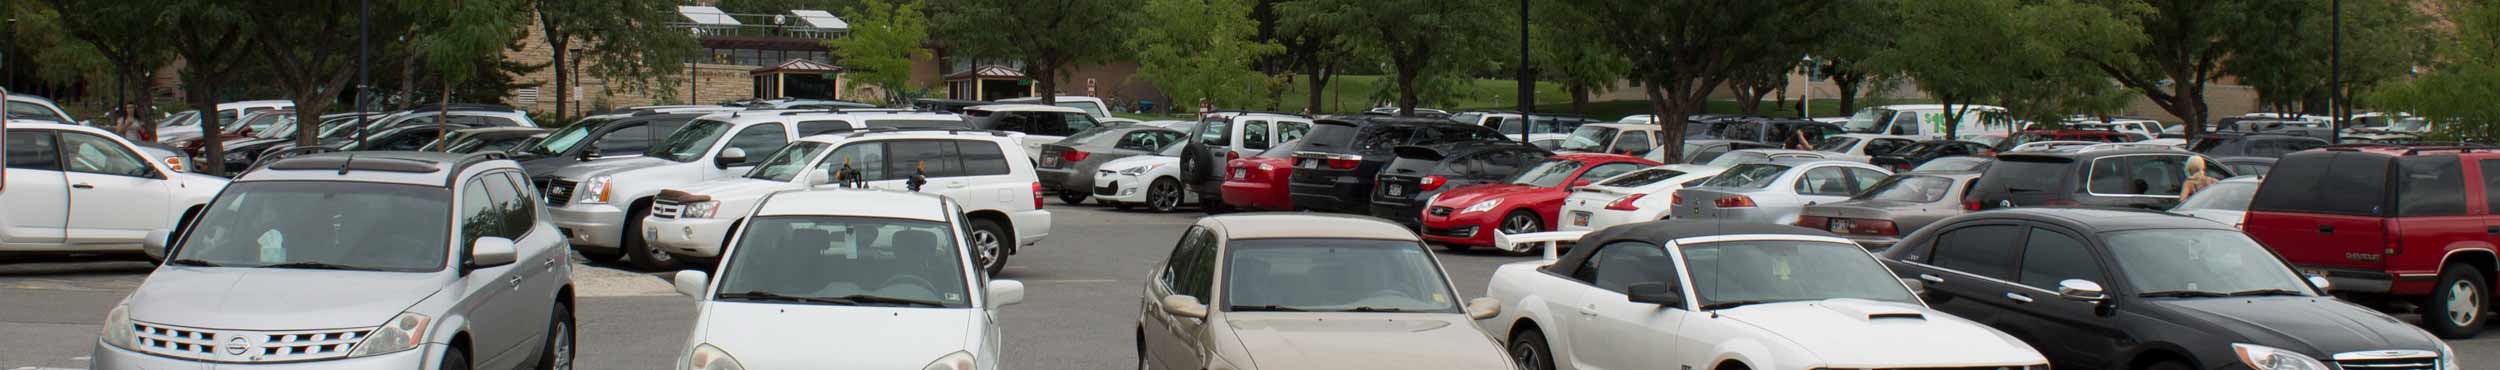 A photo of the Union parking lot full of cars.